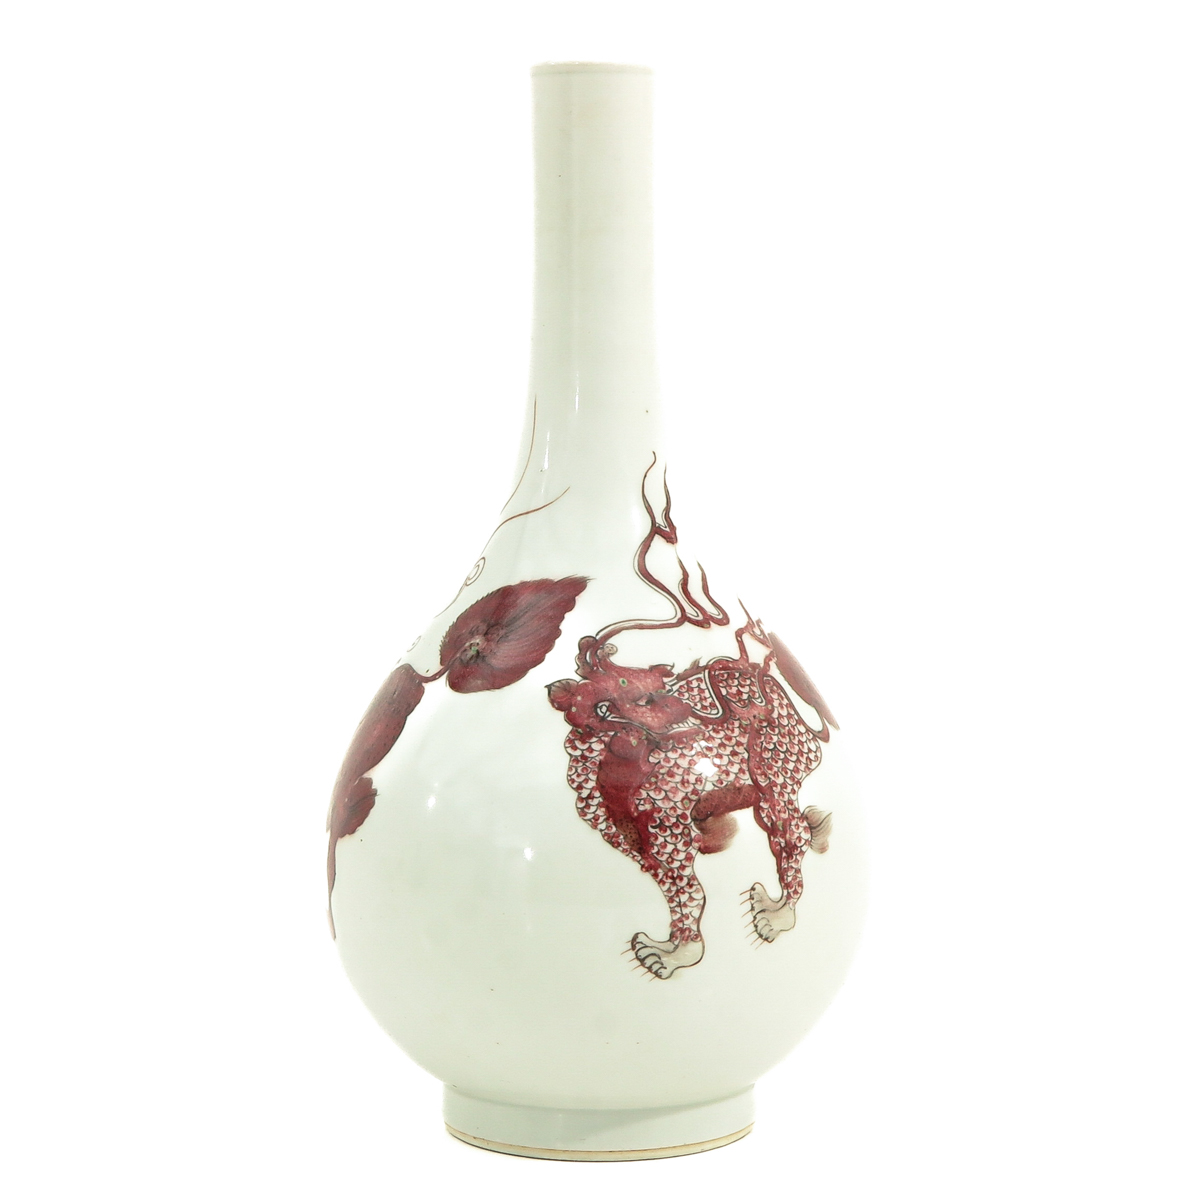 An Iron Red Kylin Decor Vase - Image 3 of 10